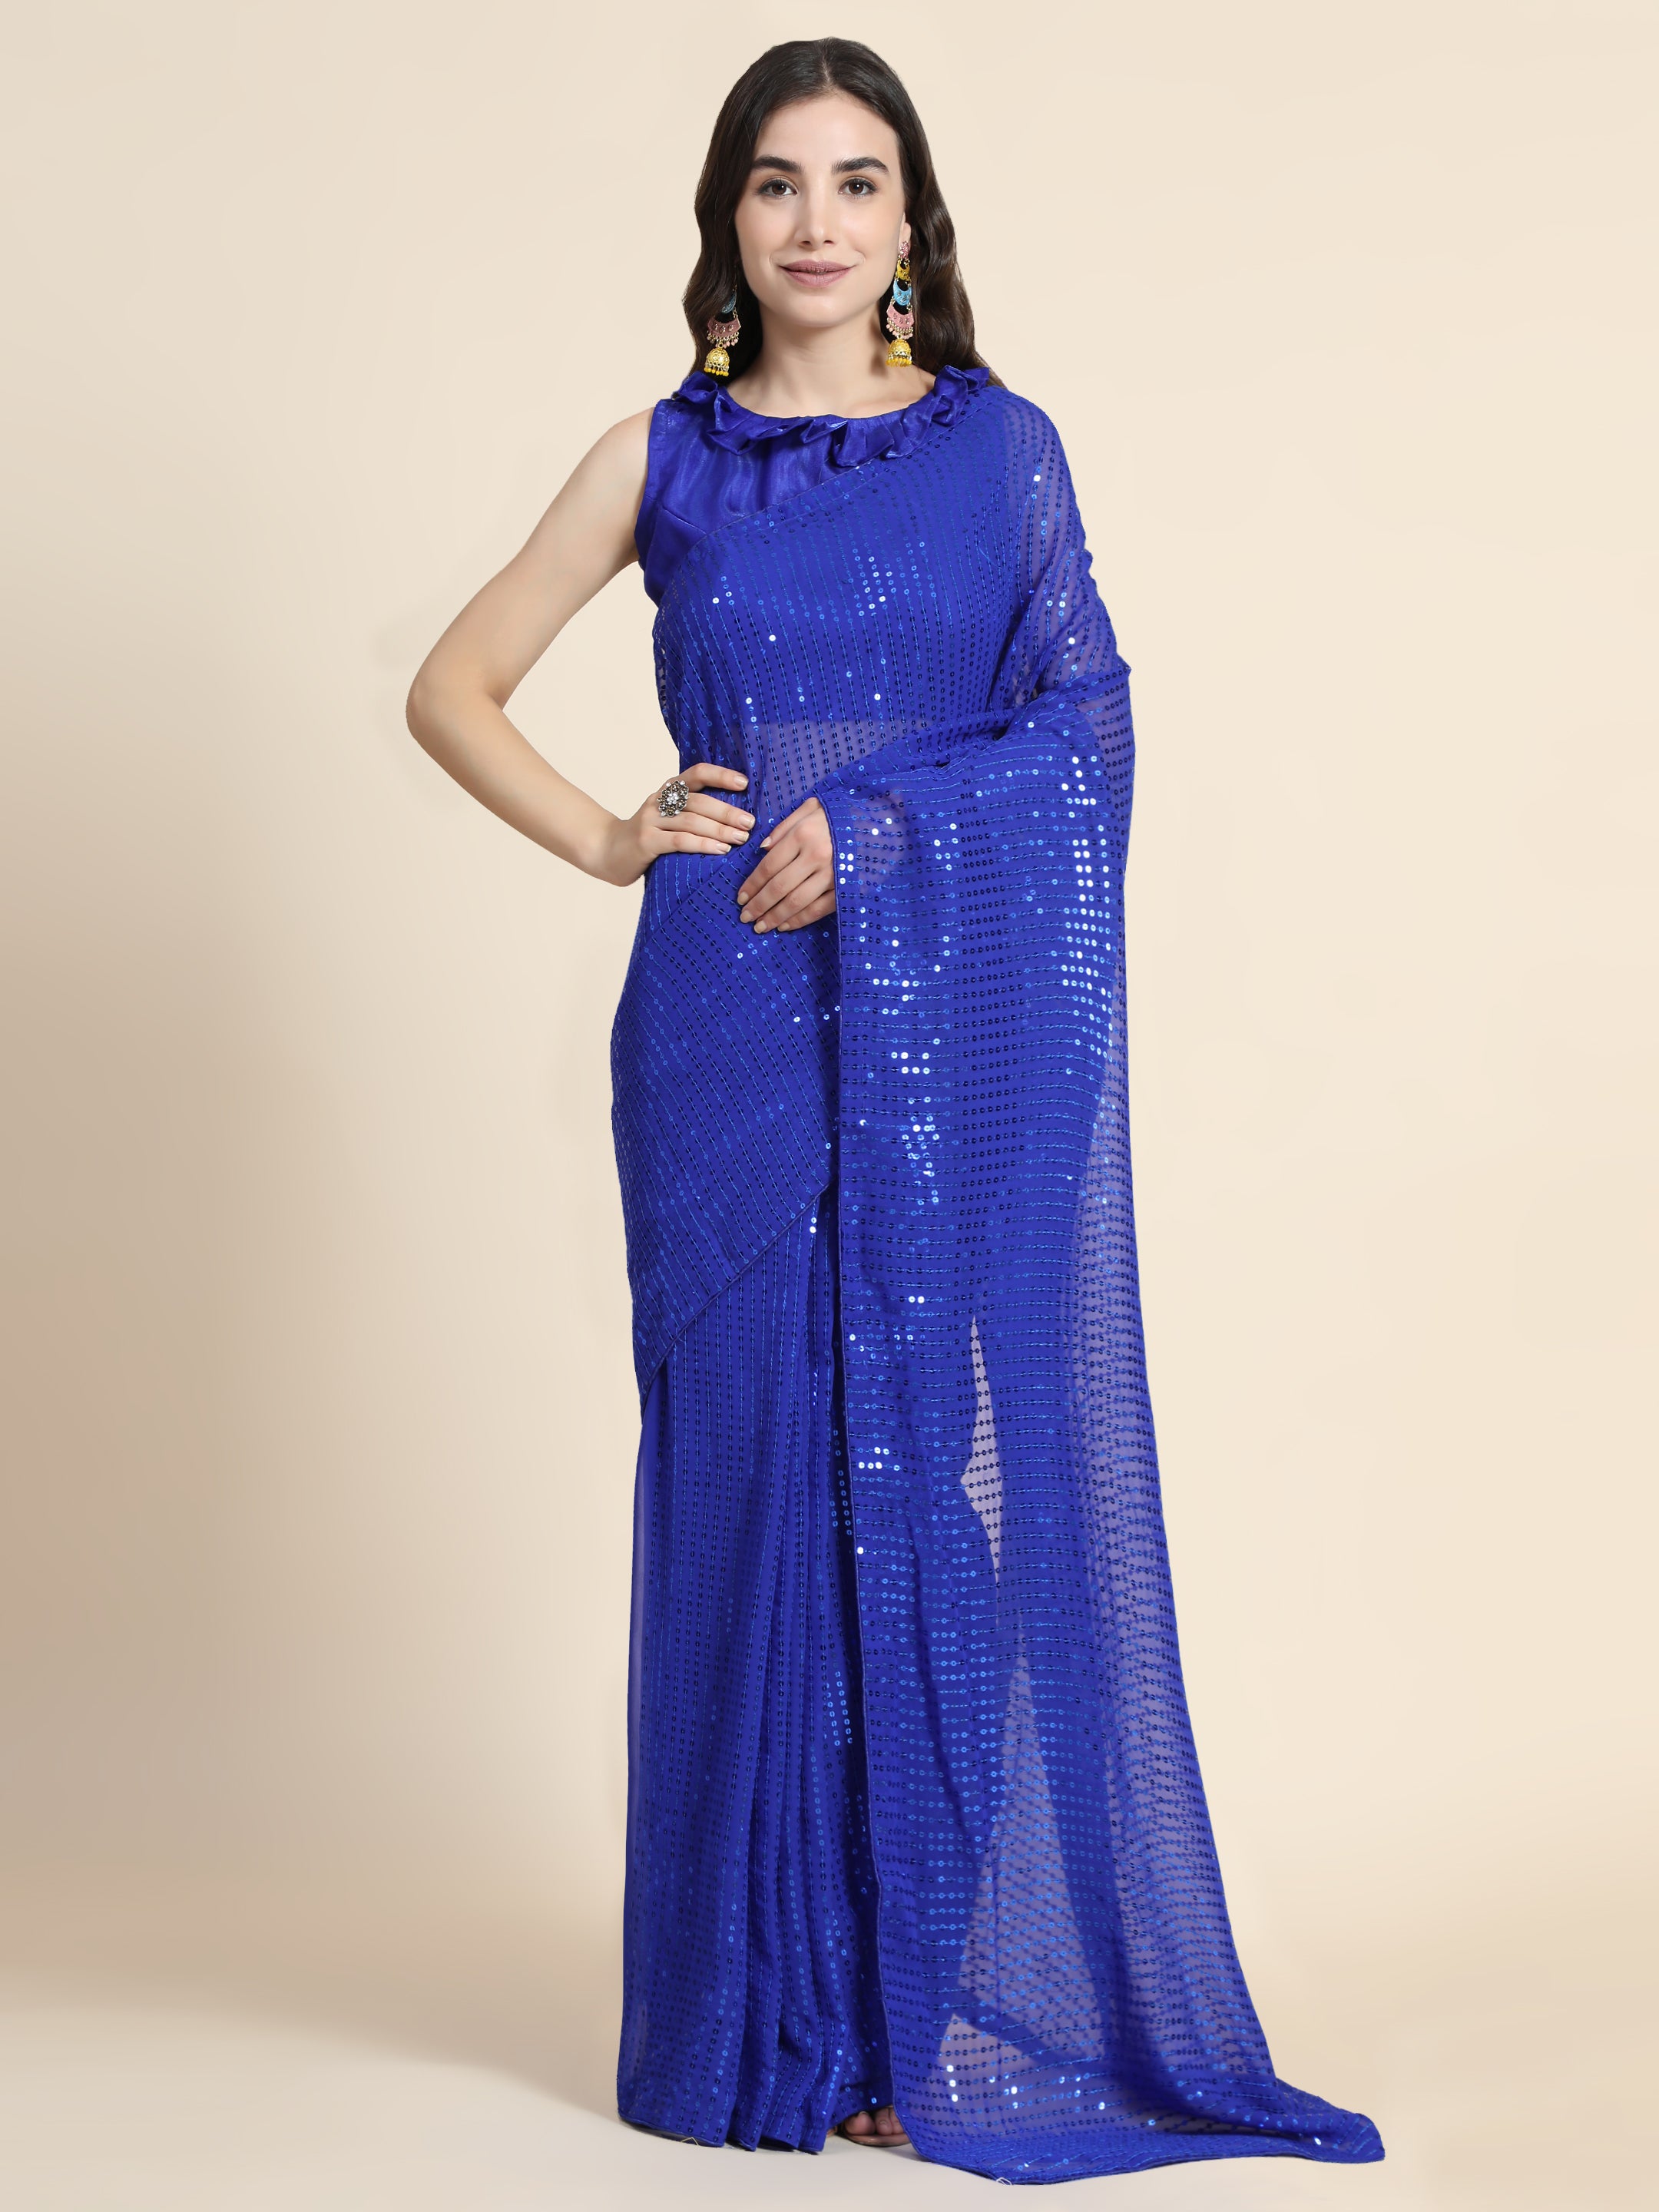 Women's Sequin Striped Paty Wear Contemporary Georgette Saree With Blouse Piece (Royal Blue) - NIMIDHYA